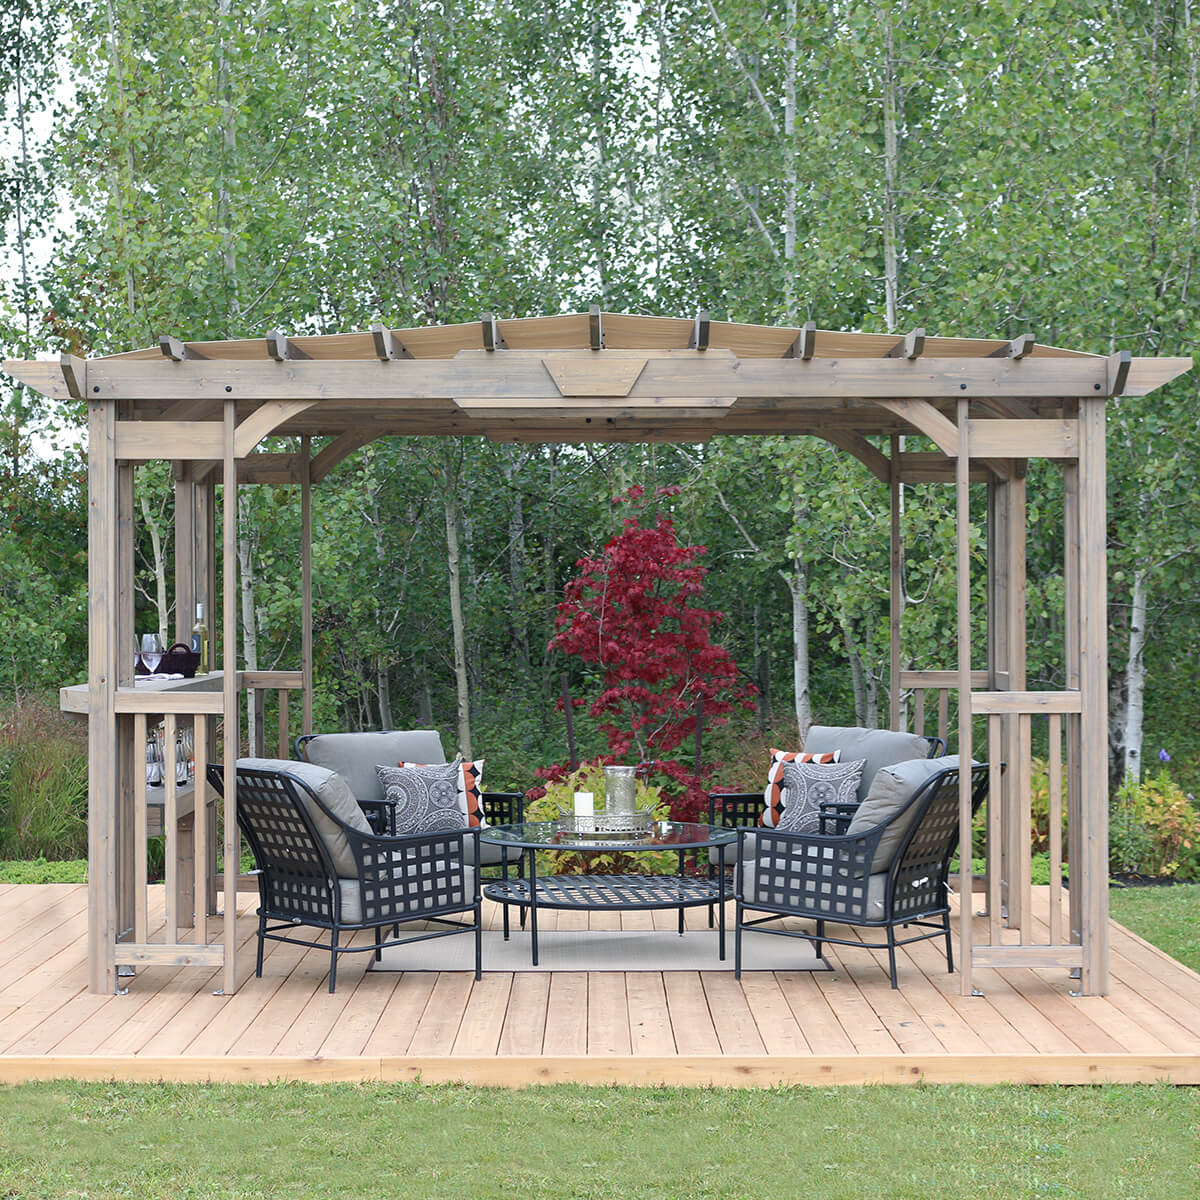 Yardistry Madison 10 x 14 Cedar Pergola in Timber Gray set against a lush, natural forest backdrop, enhancing the beauty and utility of an outdoor seating area.